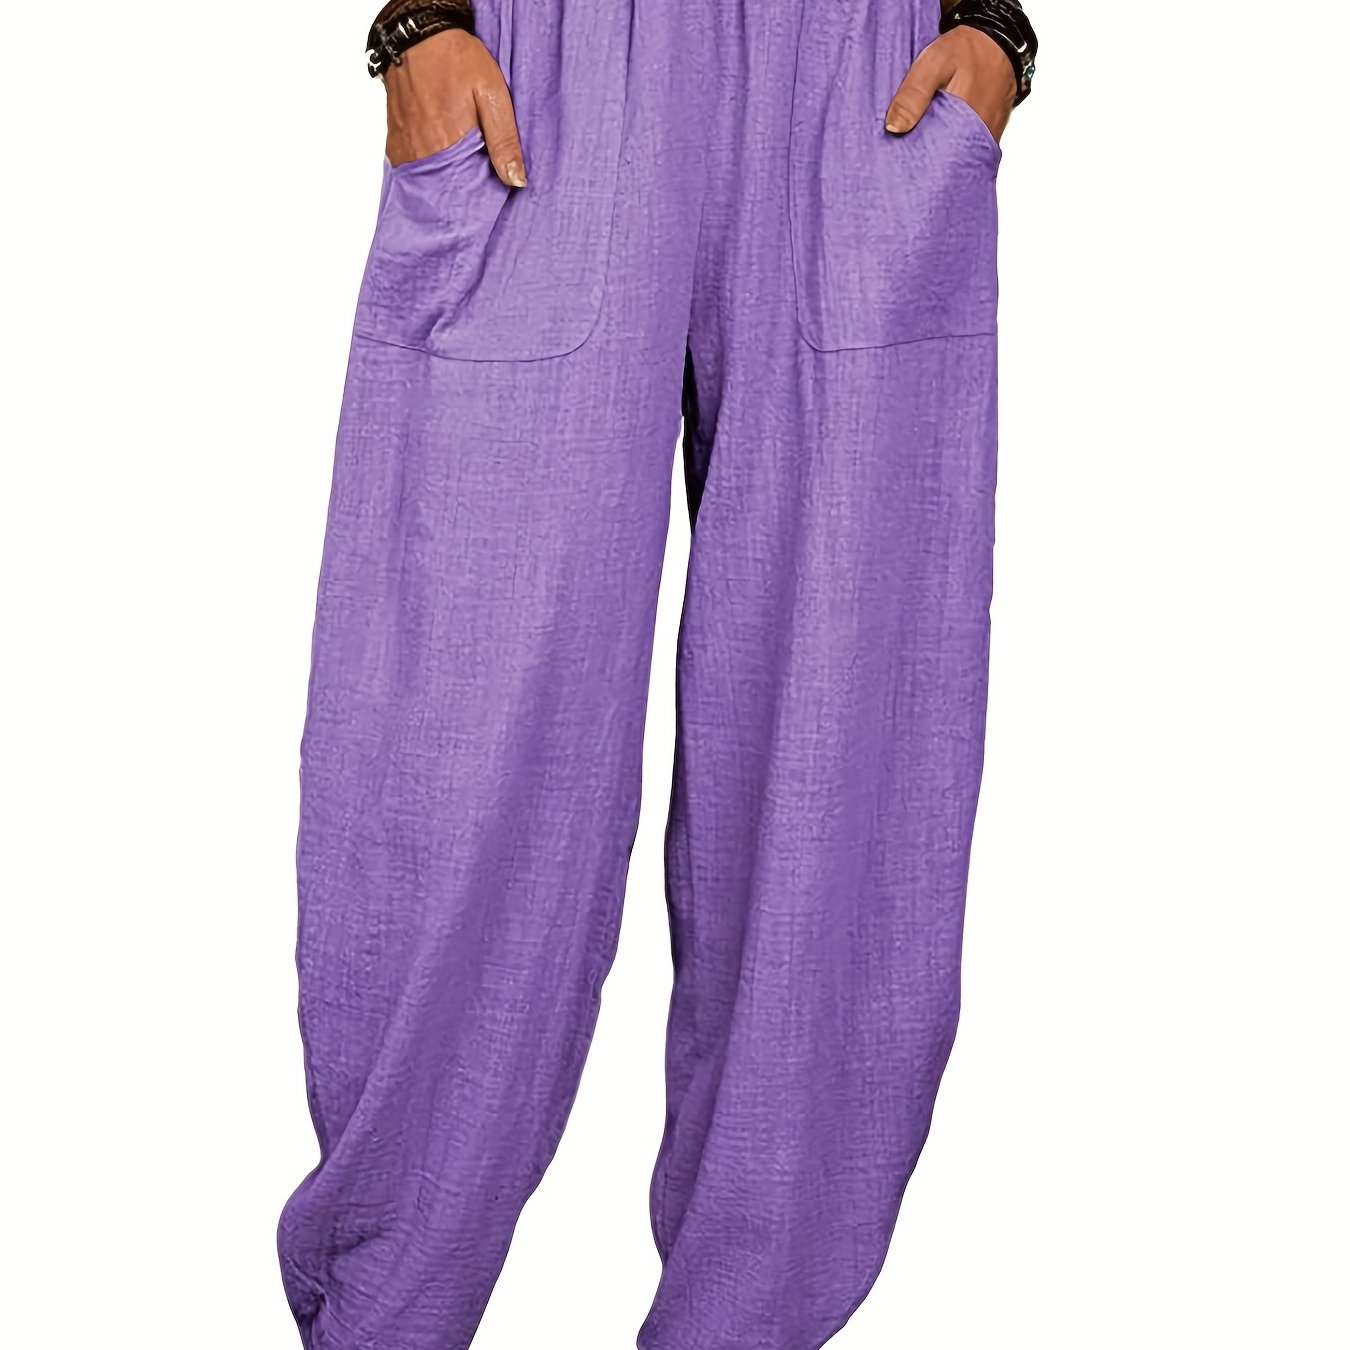 Cider Solid Elastic Waist Wide Leg Palazzo Pants for School Daily Casual Home,XL/Purple